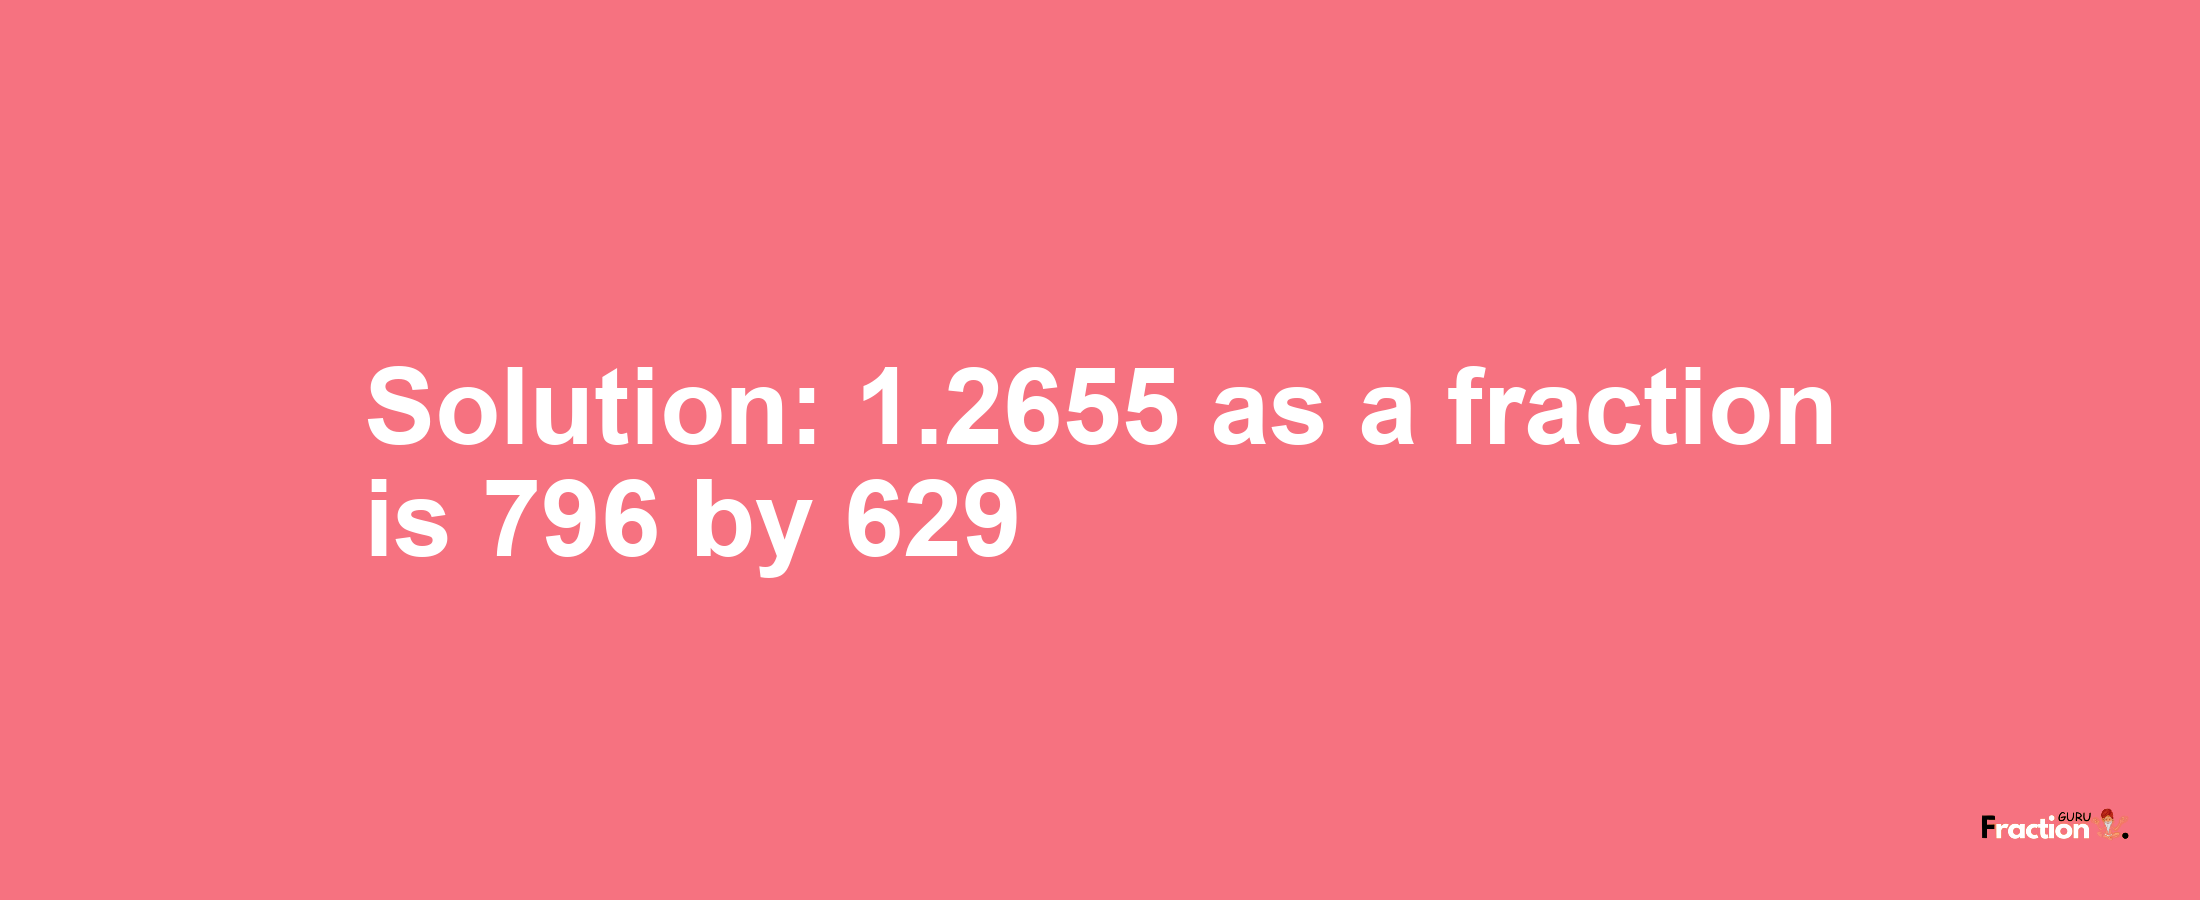 Solution:1.2655 as a fraction is 796/629